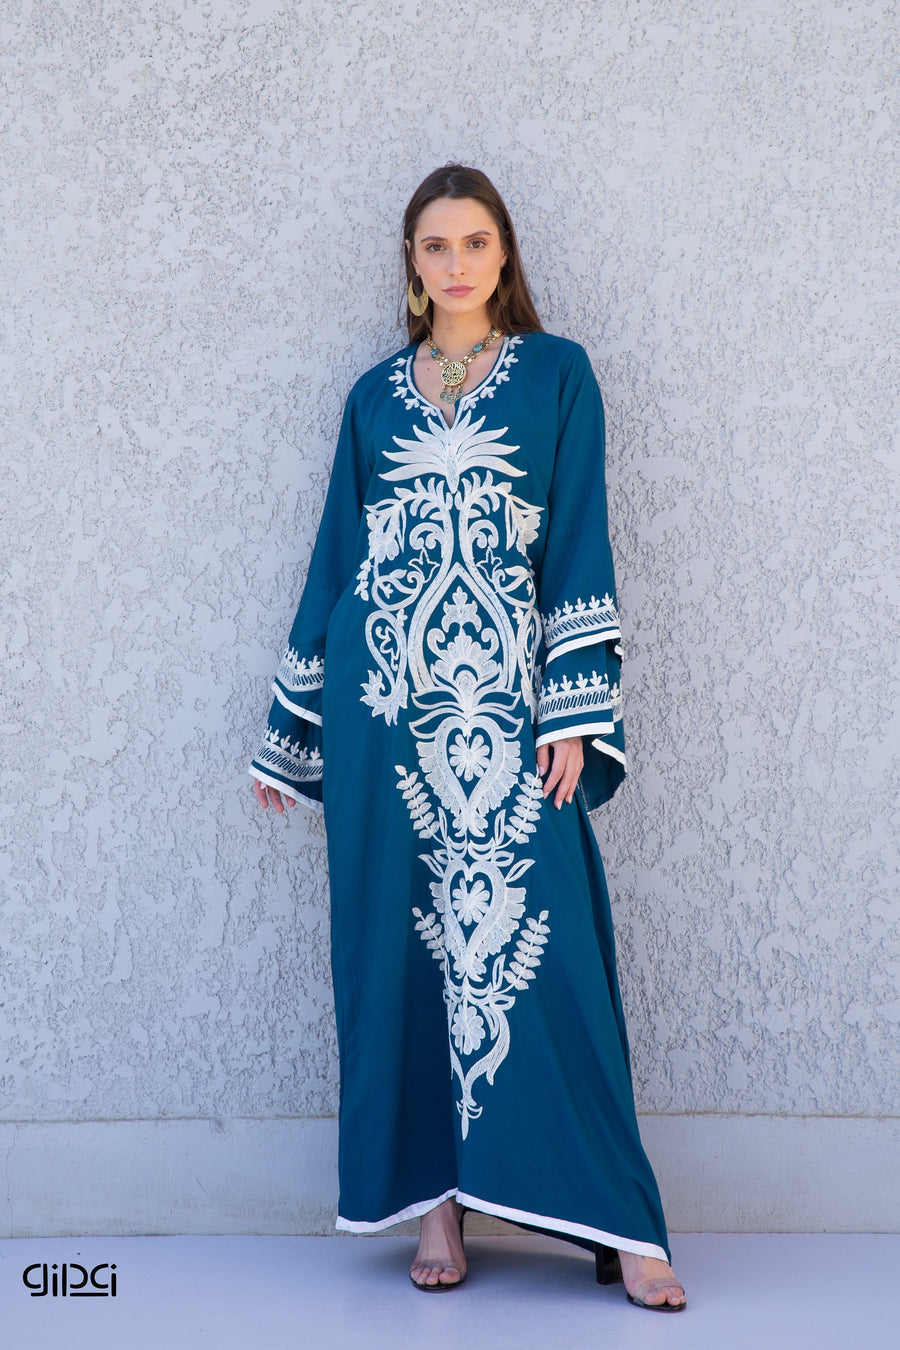 Flared sleeves blue cotton Caftan, wide sleeve caftan for women, embroidered Caftan dress, Caftan maxi dress, Caftans for women, Caftans